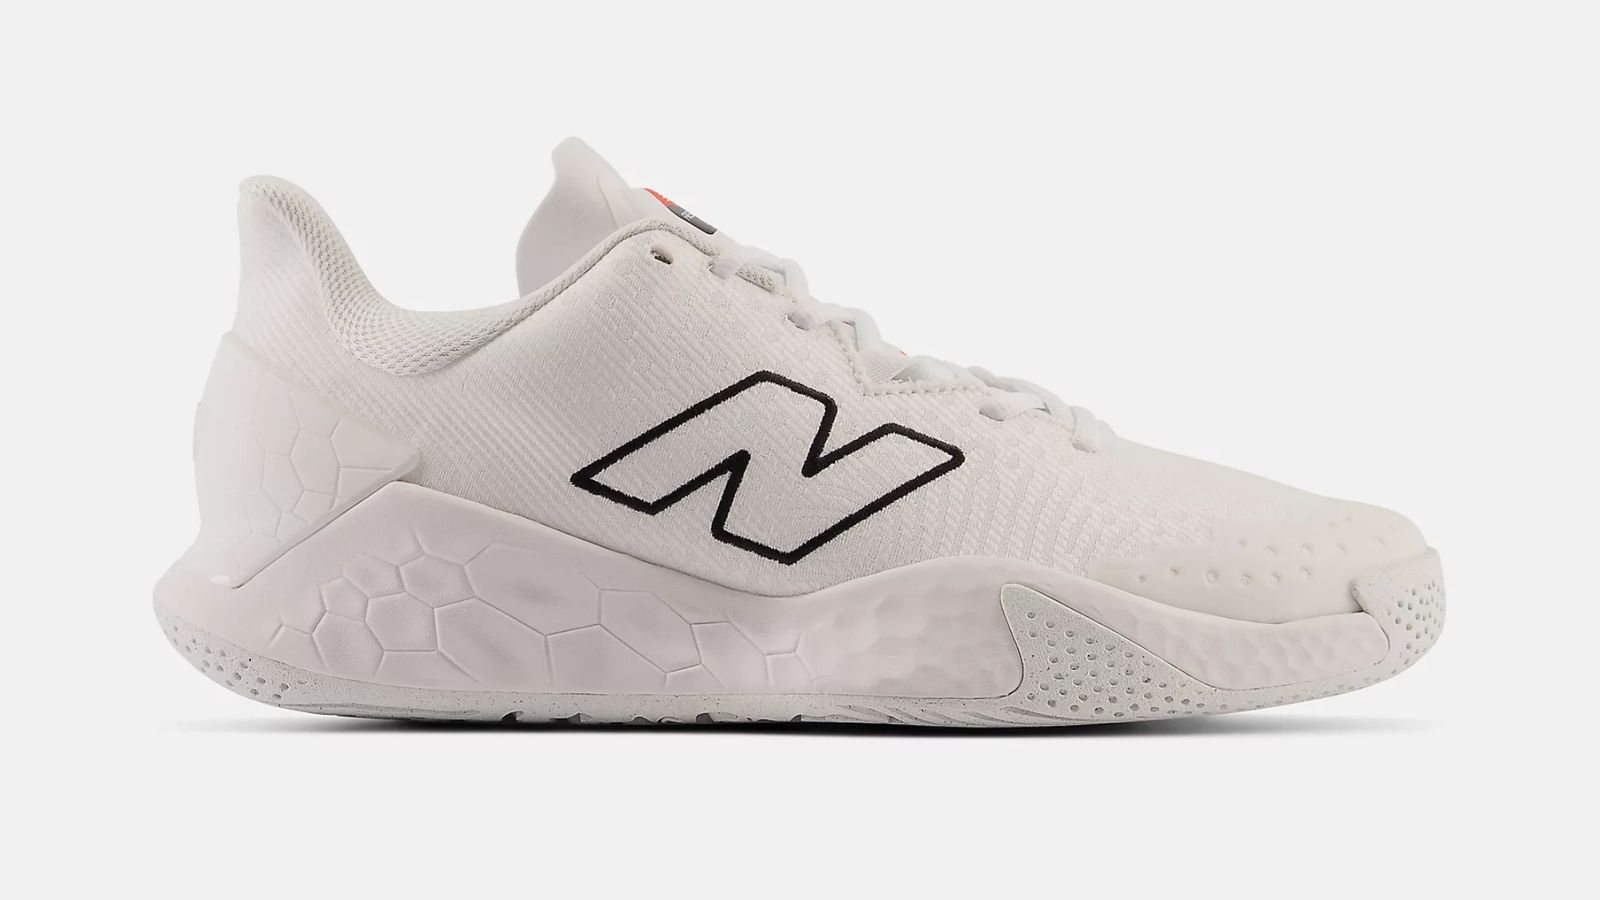 New Balance Fresh Foam X Lav v2 product image of a creamy white trainer with black NB branding.